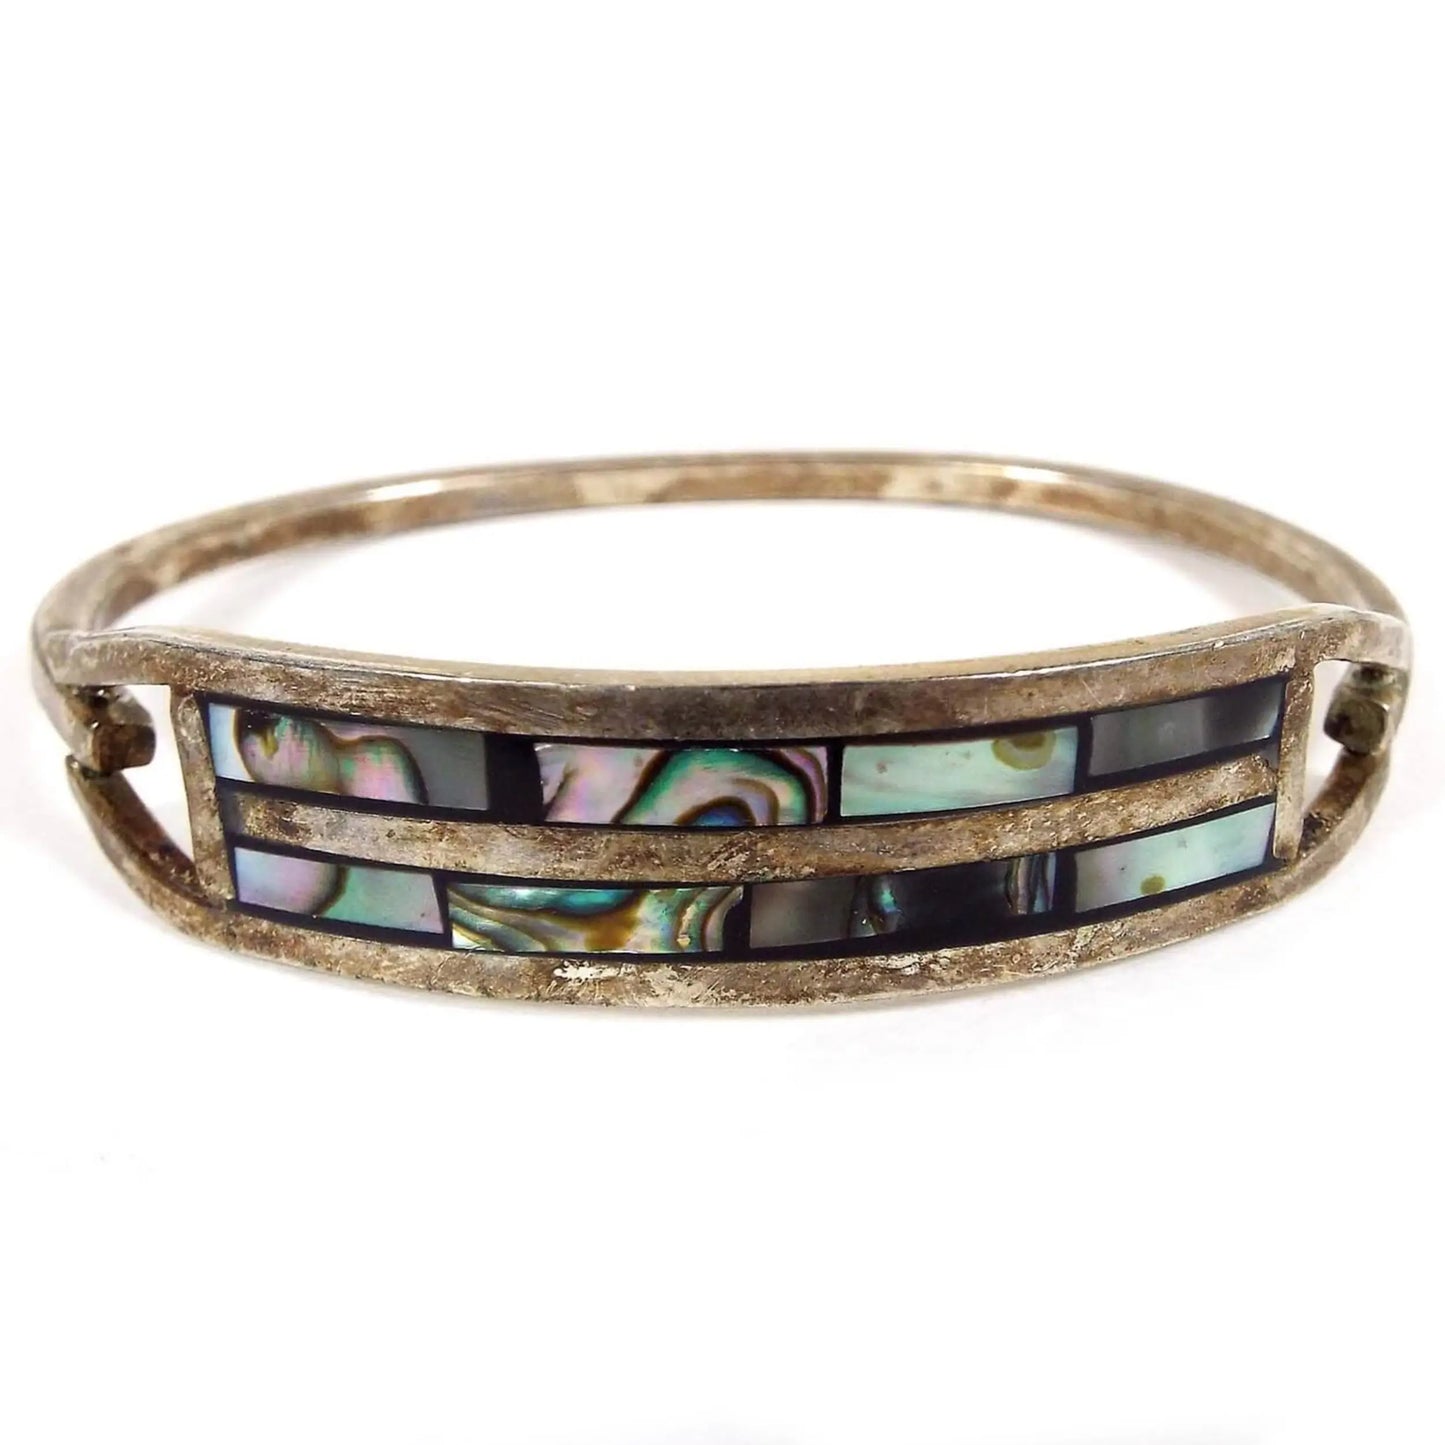 Front view of the retro vintage Taxco hinged bangle bracelet. It has darkened silver tone color metal. The front has a curved bar area with two rows of pearly multi color inlaid abalone shell.